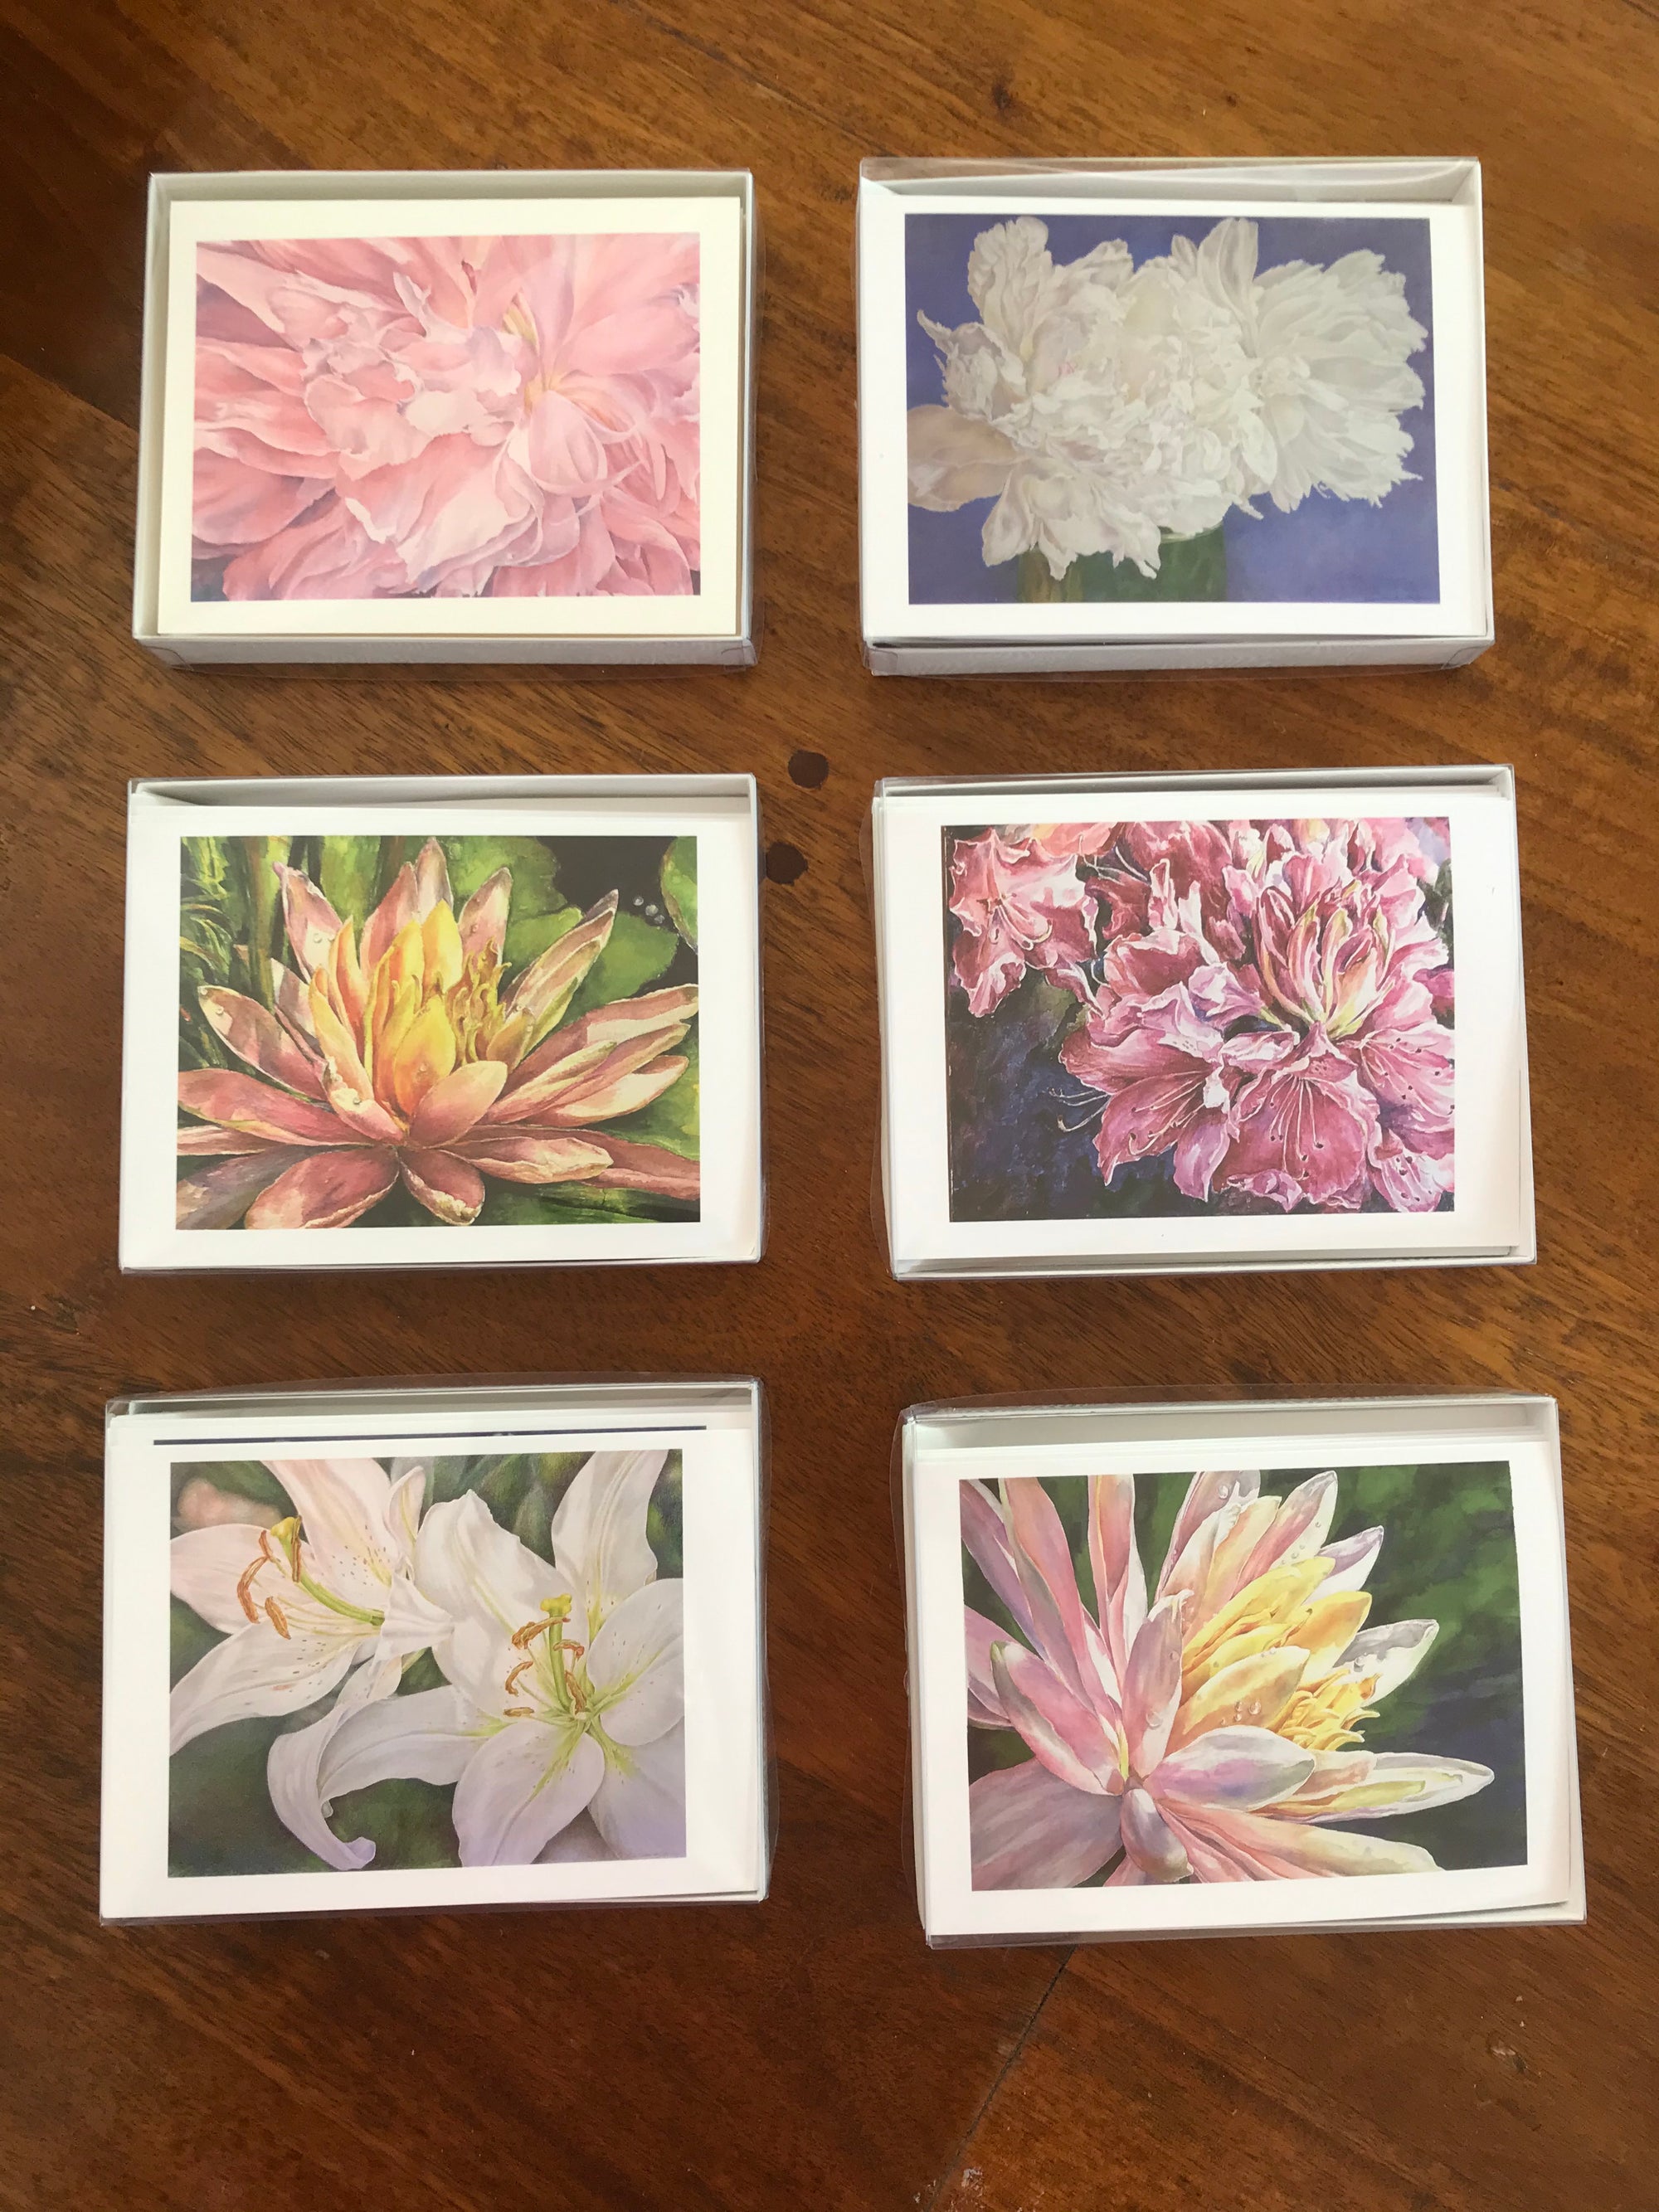 Set of 6 flower themed blank greeting cards from watercolor and colored pencil reproductions by Eileen Baumeister McIntyre. Each card is printed on watercolor paper, is 4.25" x 5.5" and comes with envelopes.